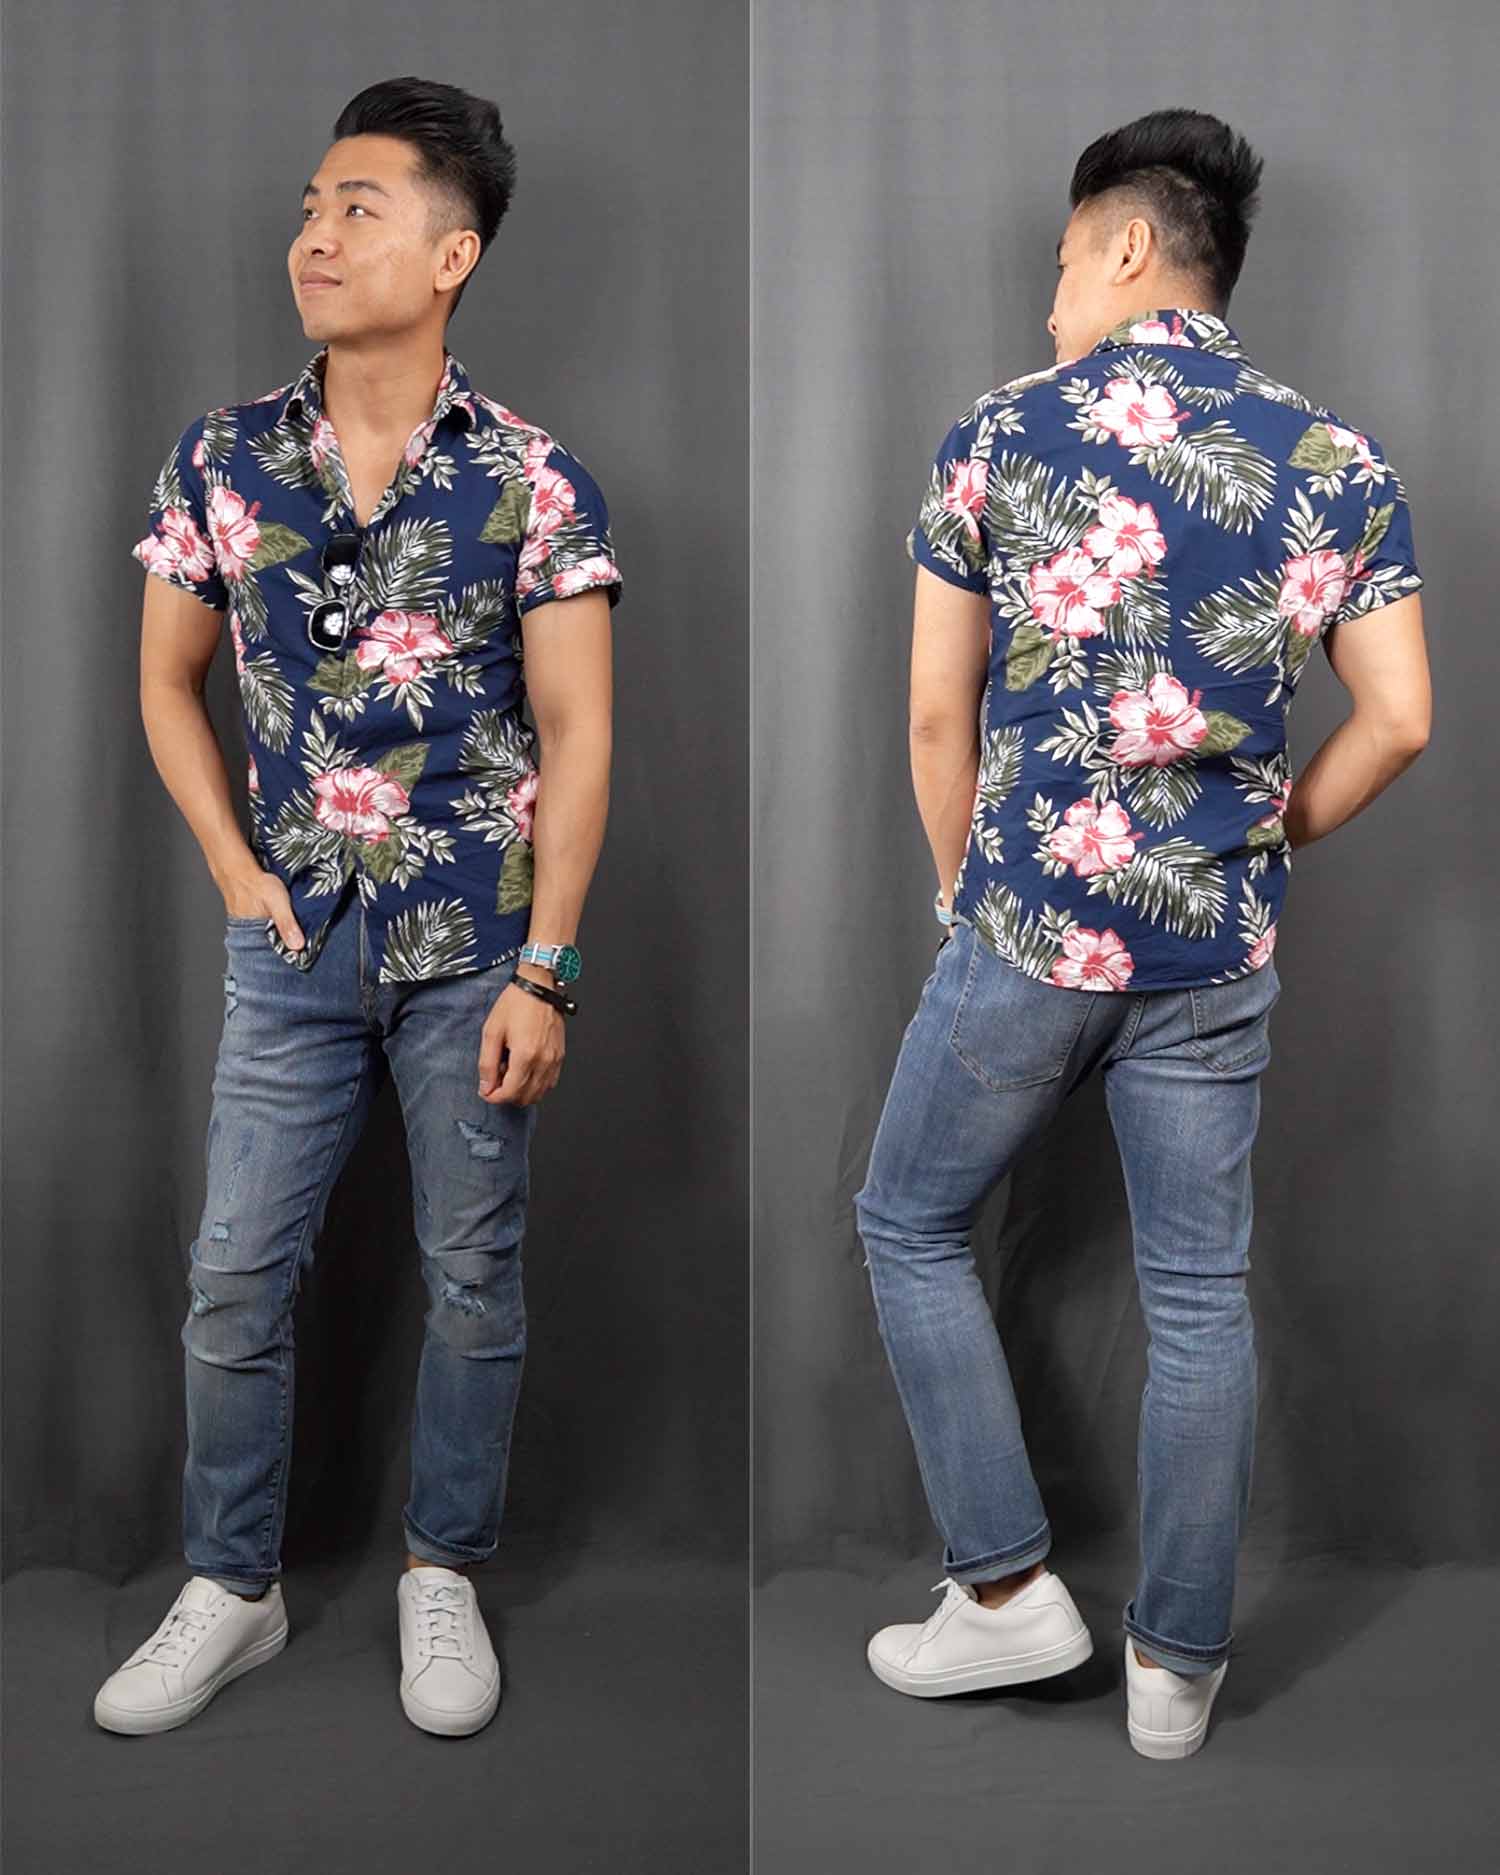 Floral Print Short Sleeve Button Down Shirt Outfit